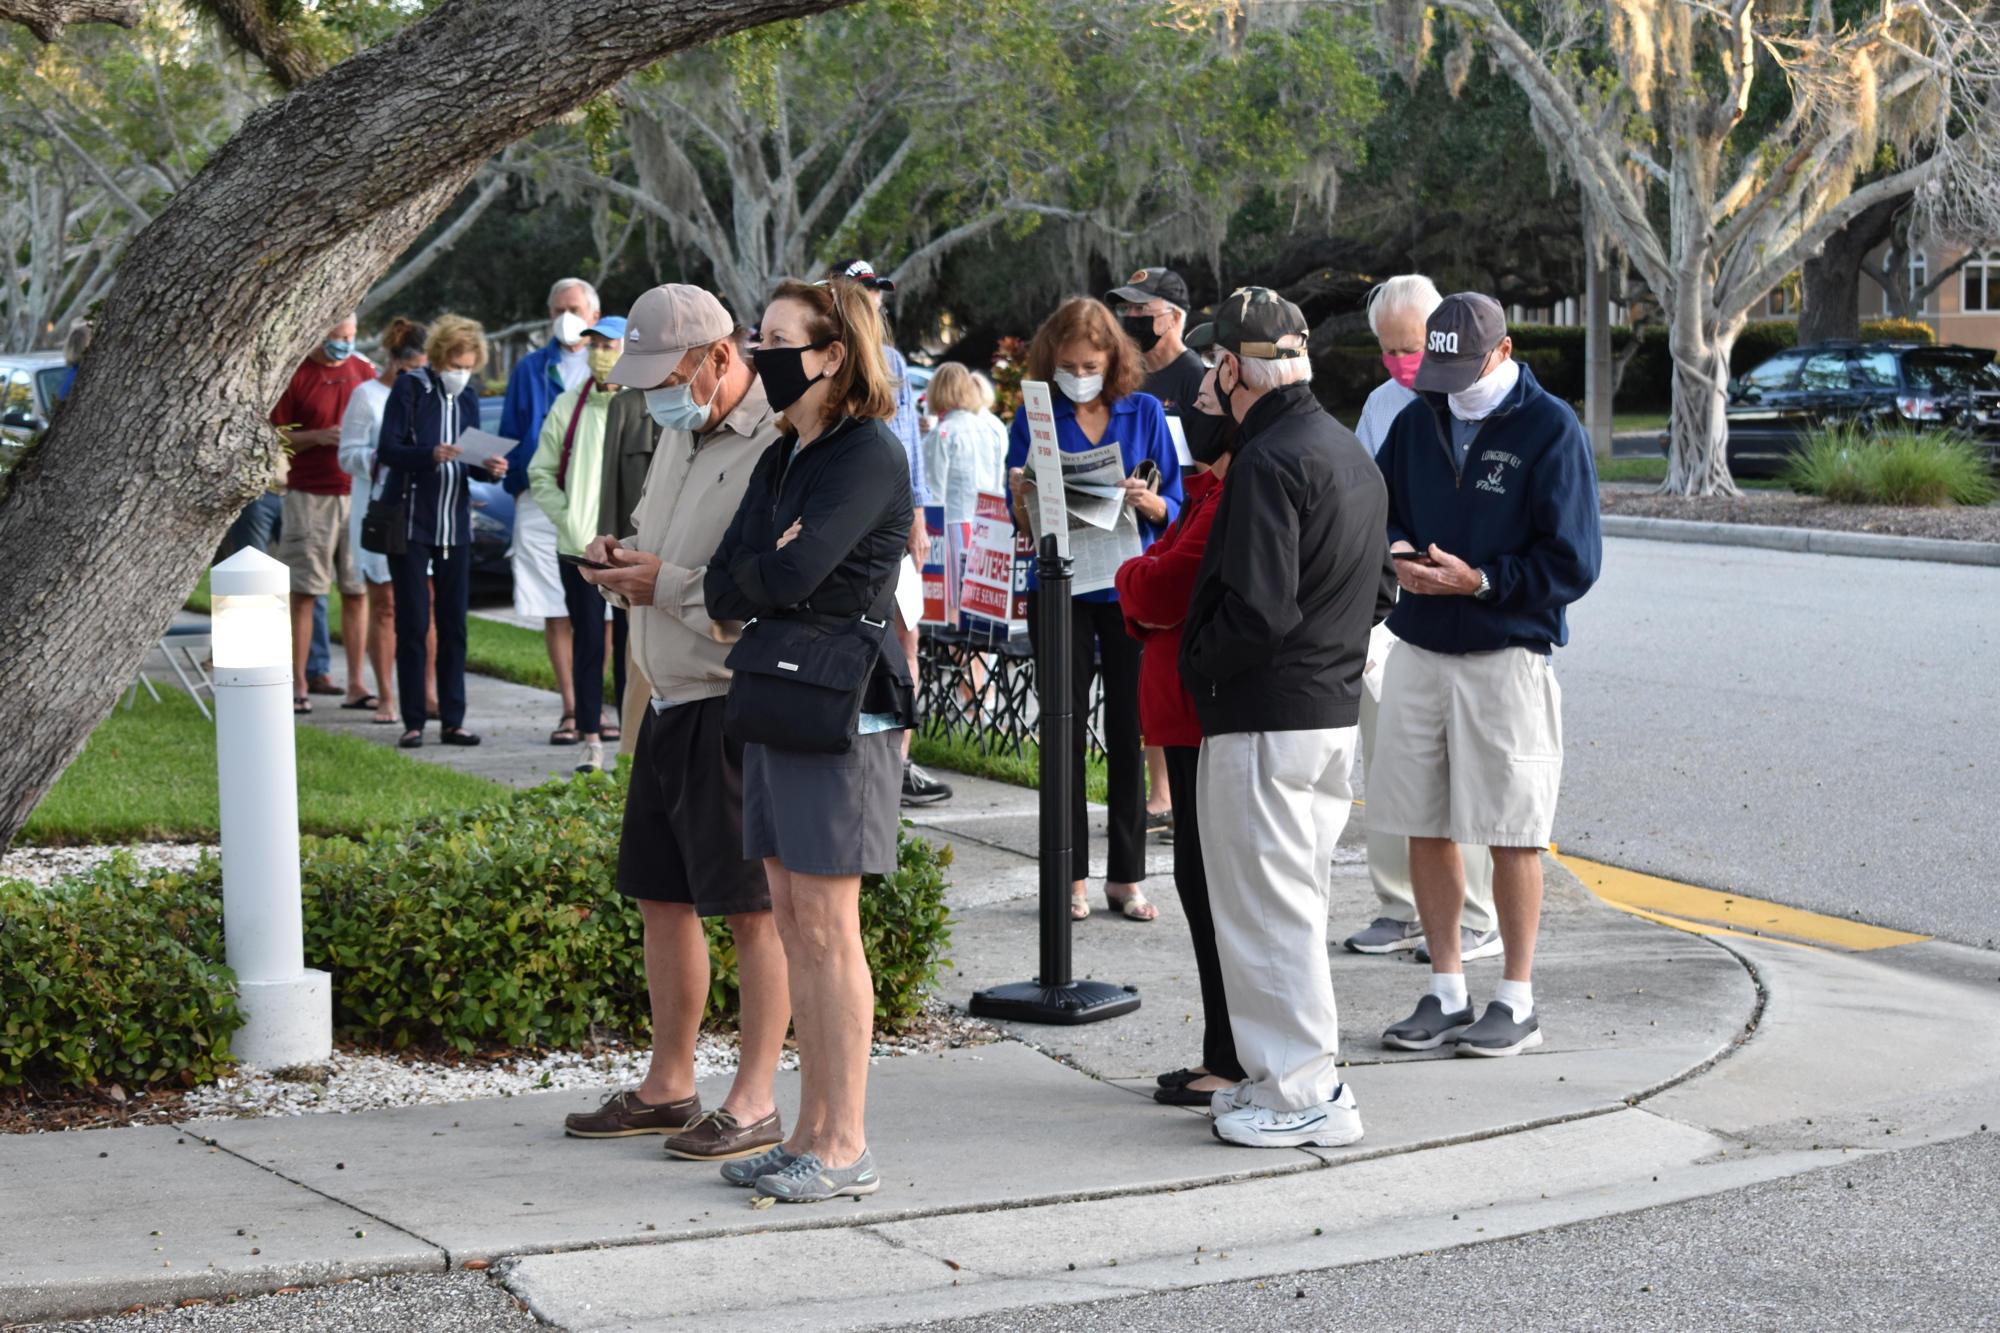 The line of people at Town Hall’s Precinct 201 wrapped around onto Bay Isles Road.